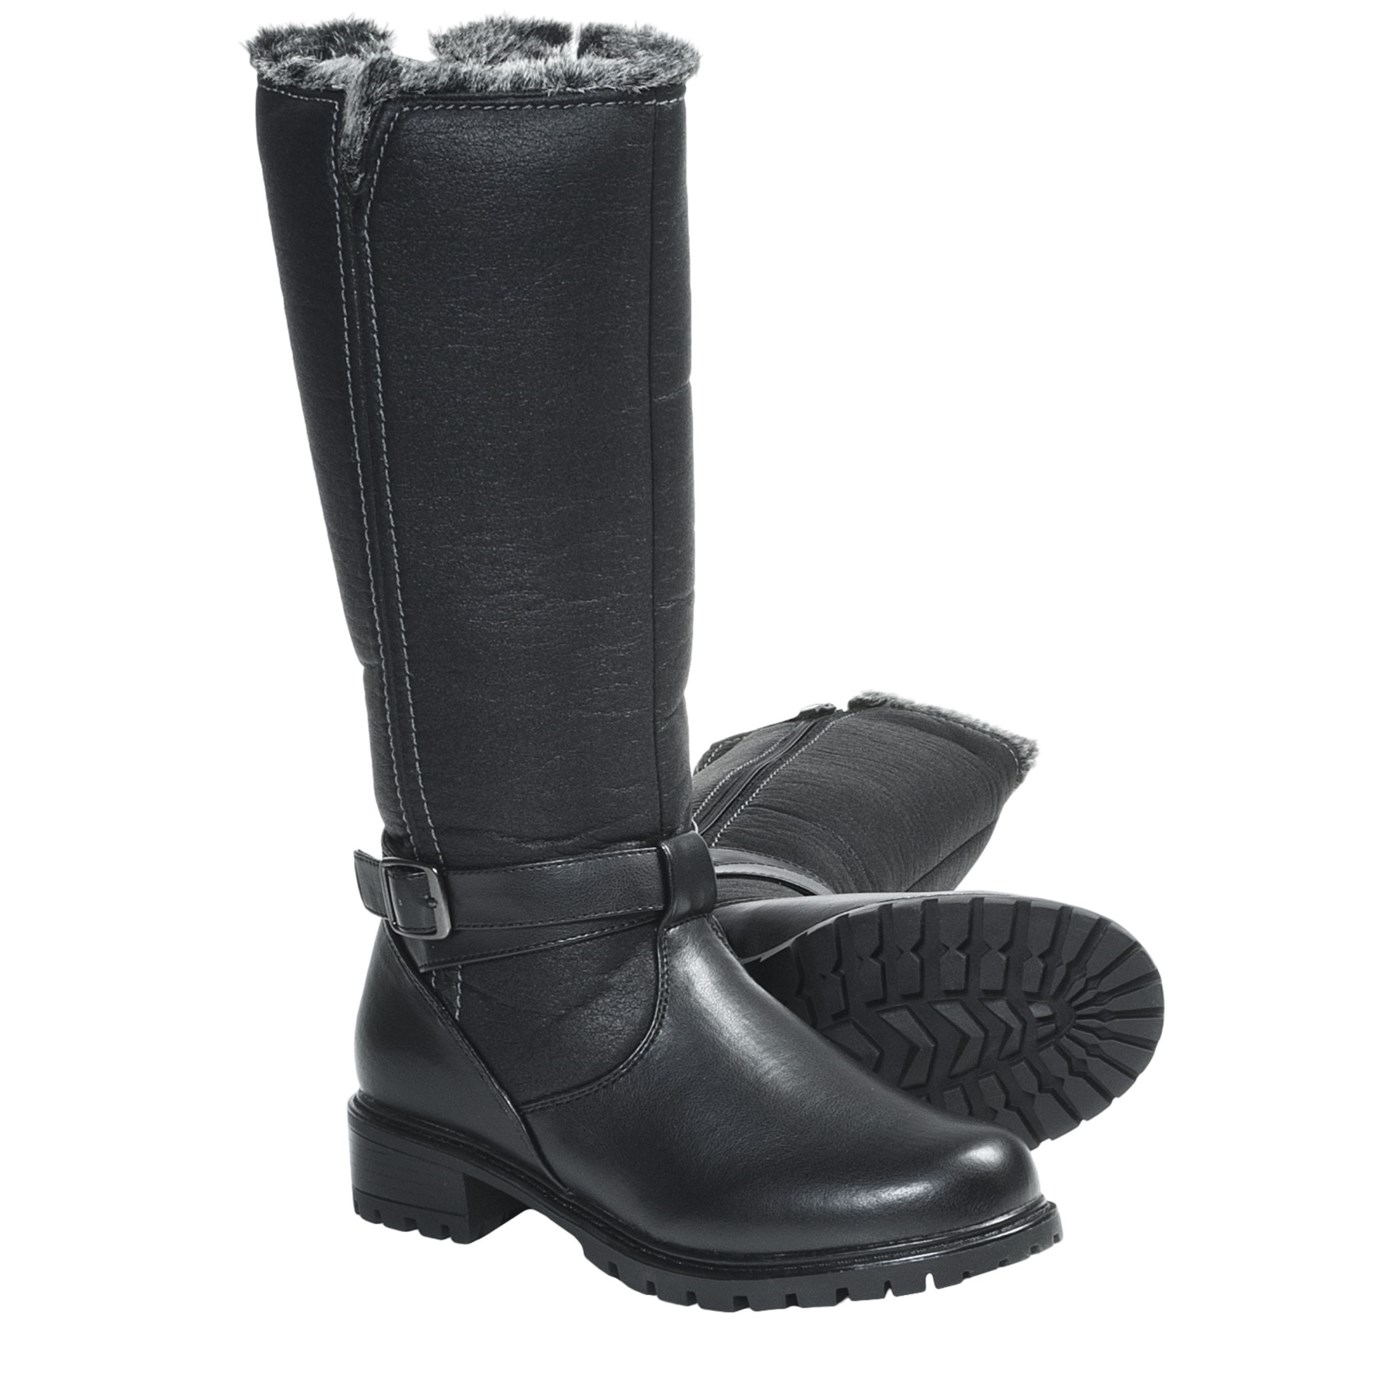 Aquatherm by Santana of Canada Blair Boots (For Women) 5294H 41